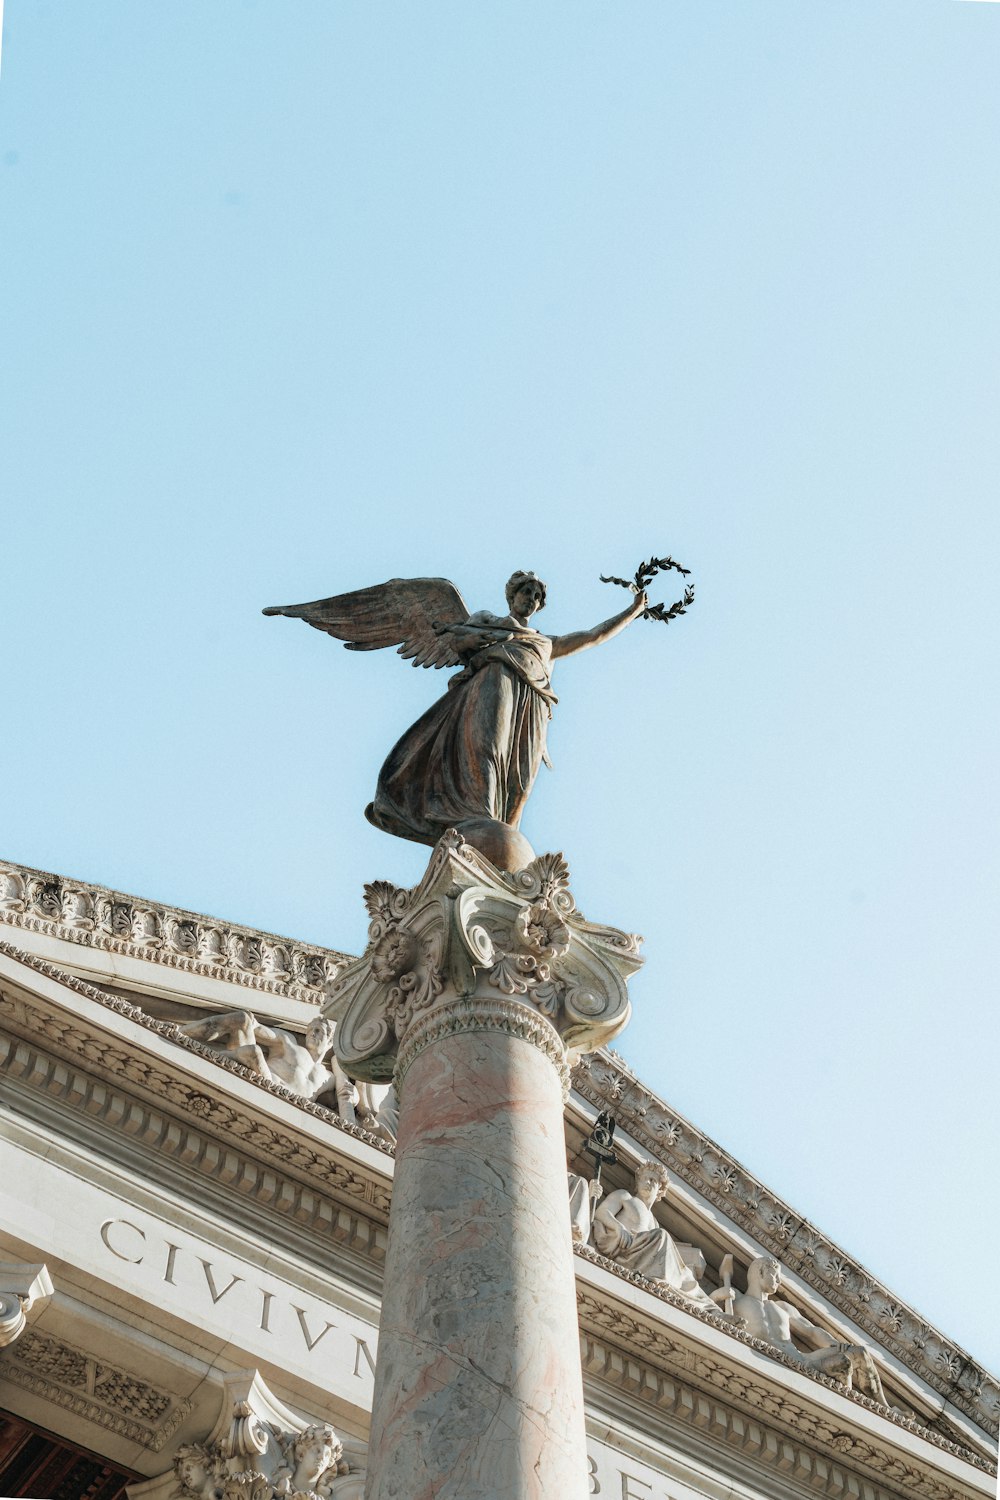 a statue on top of a pillar in front of a building